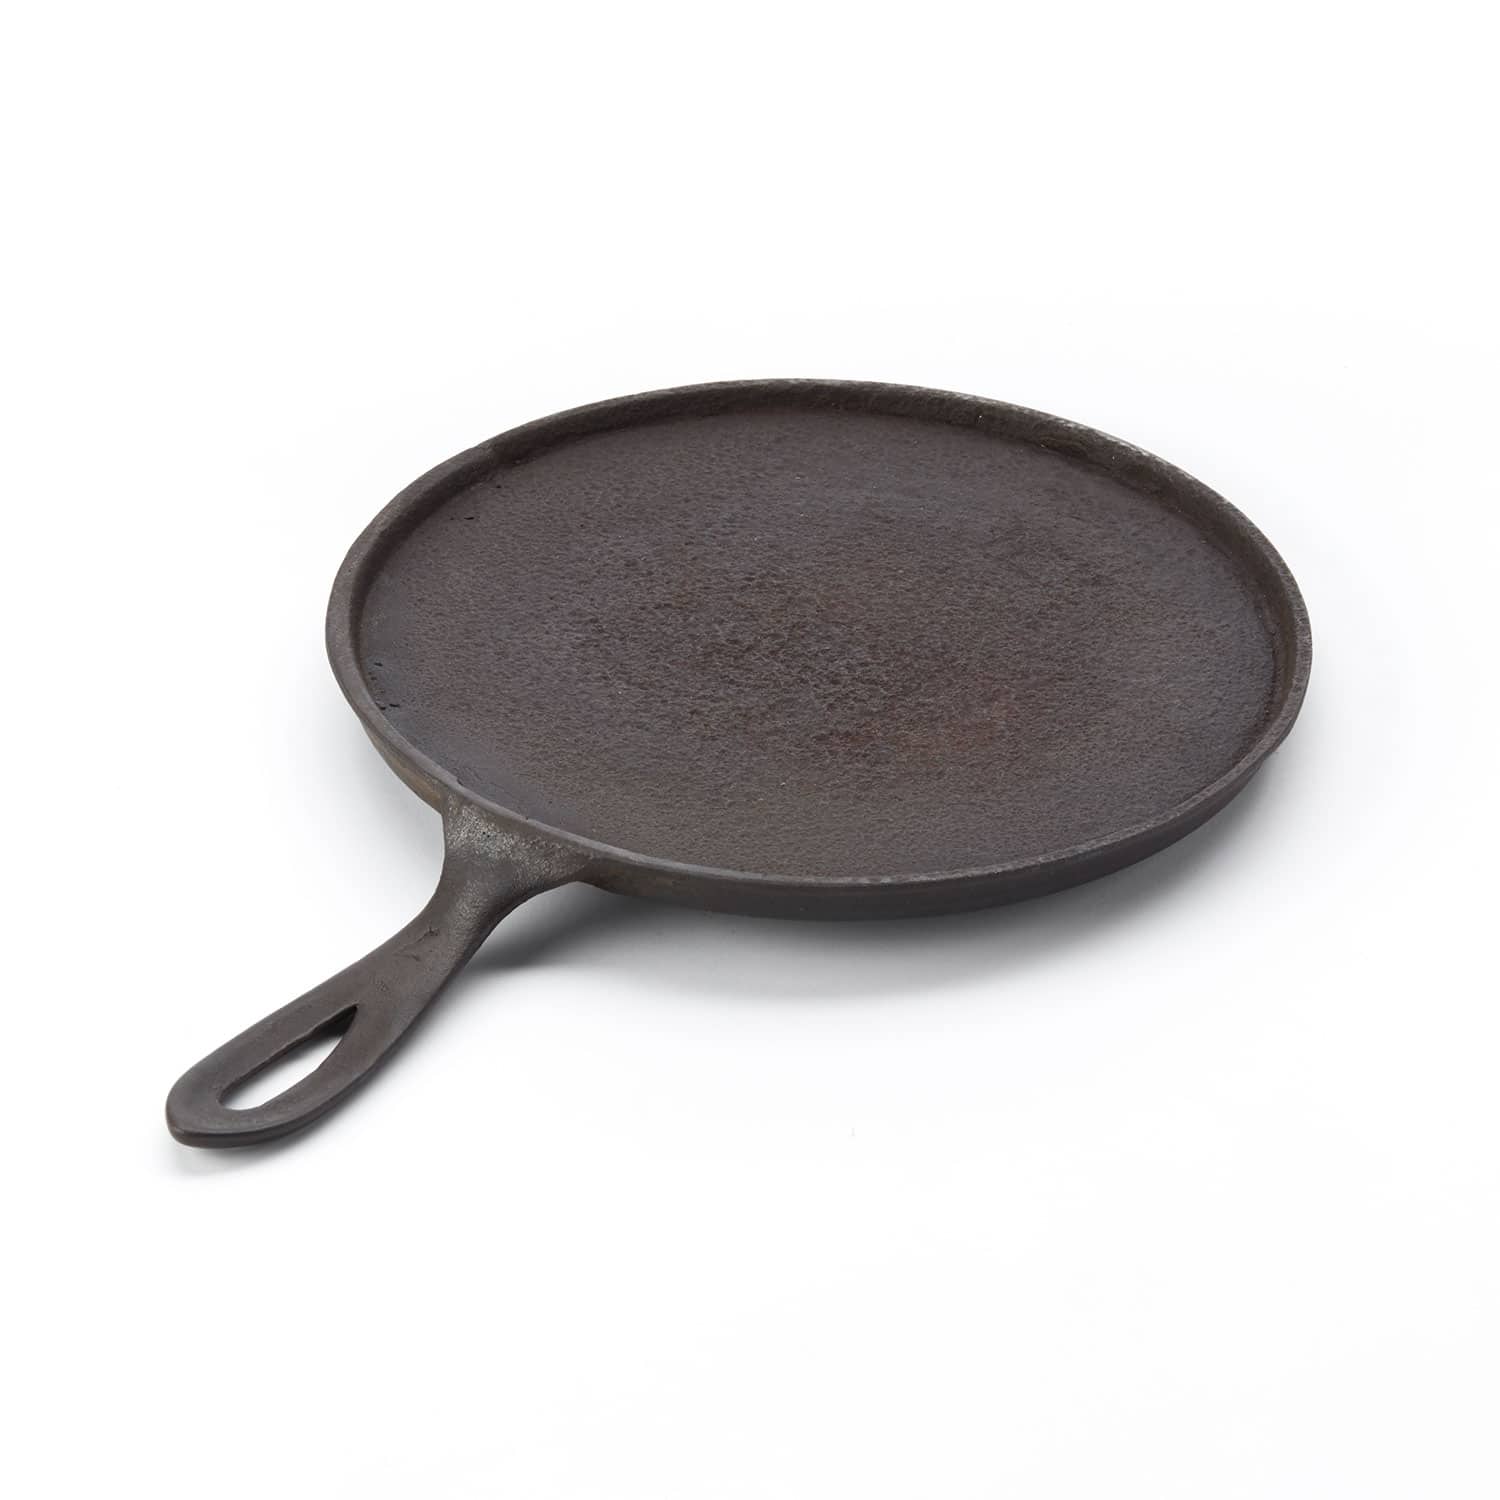 Cast Iron B (Vintage Size 7 Griddle)  Rental for Photography at Noho  Surface and Prop